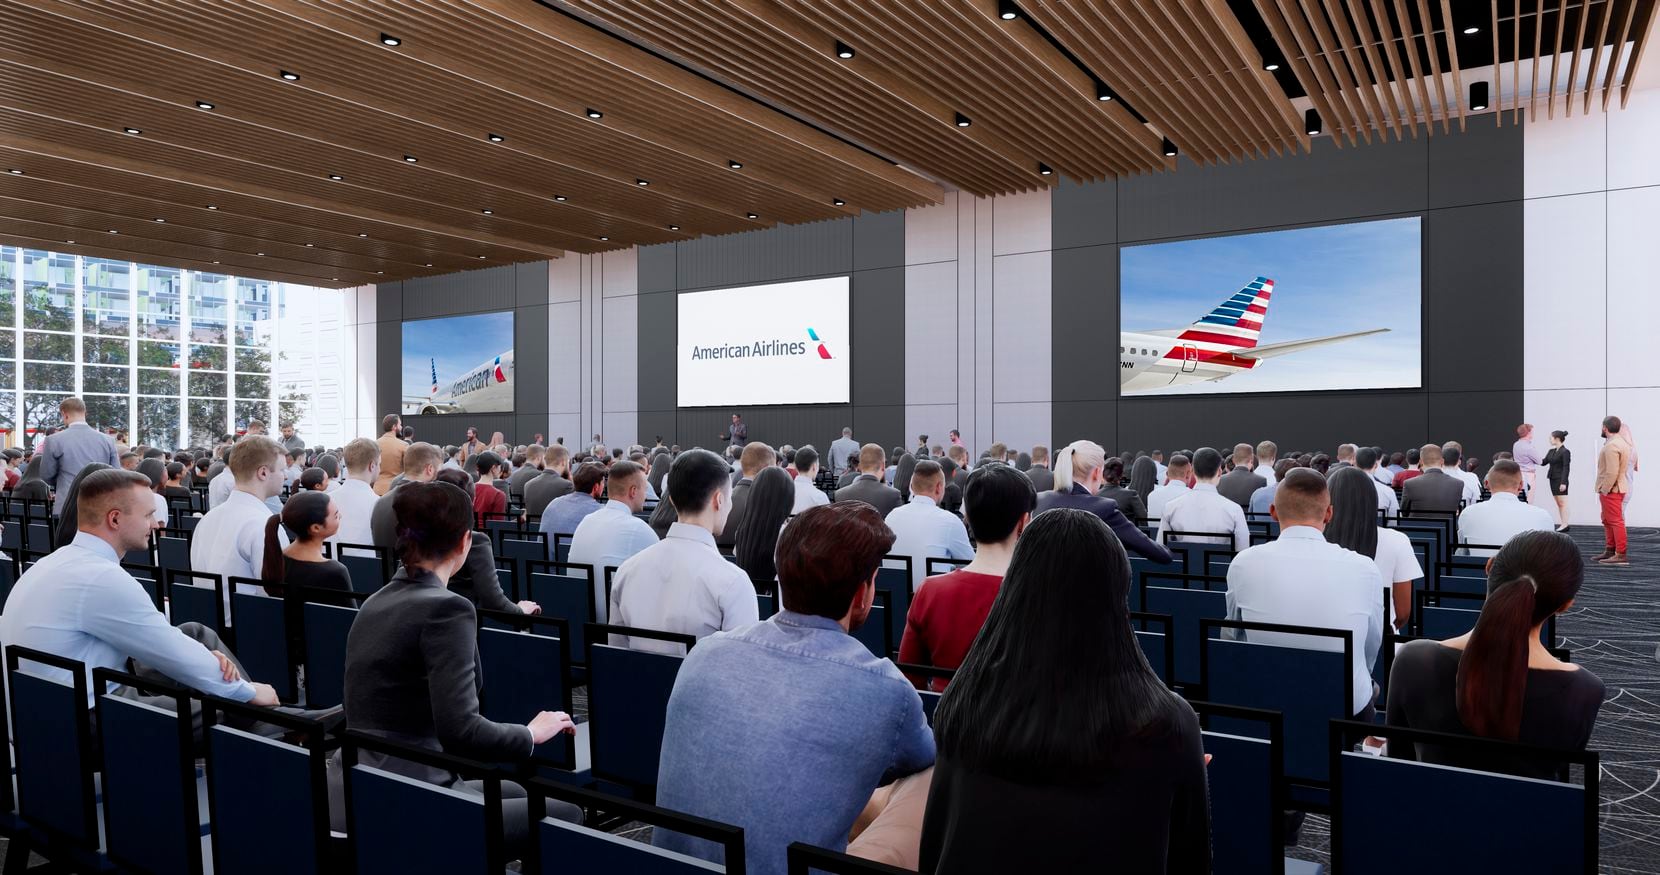 A rendering of the ballroom in the new hospitality complex at American Airlines'...